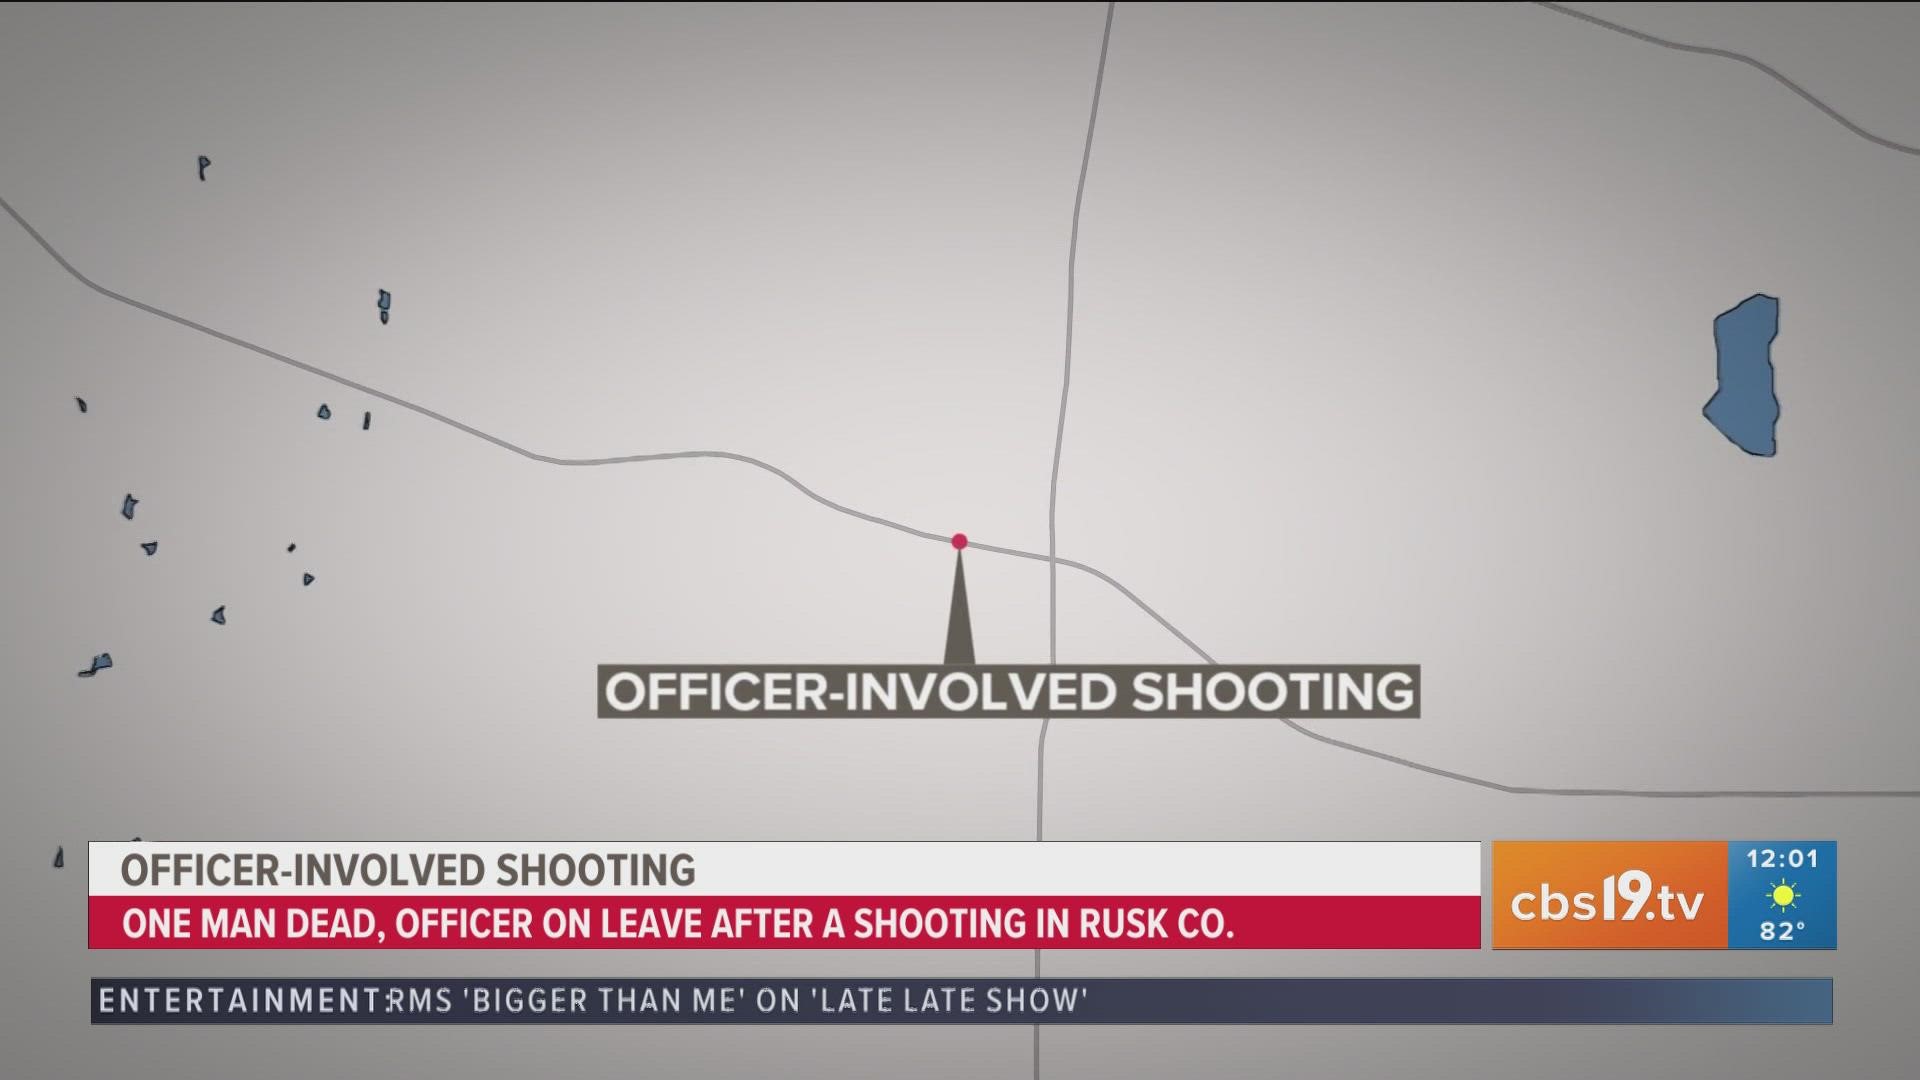 1 dead, deputy placed on administrative leave after officer-involved shooting in Rusk County